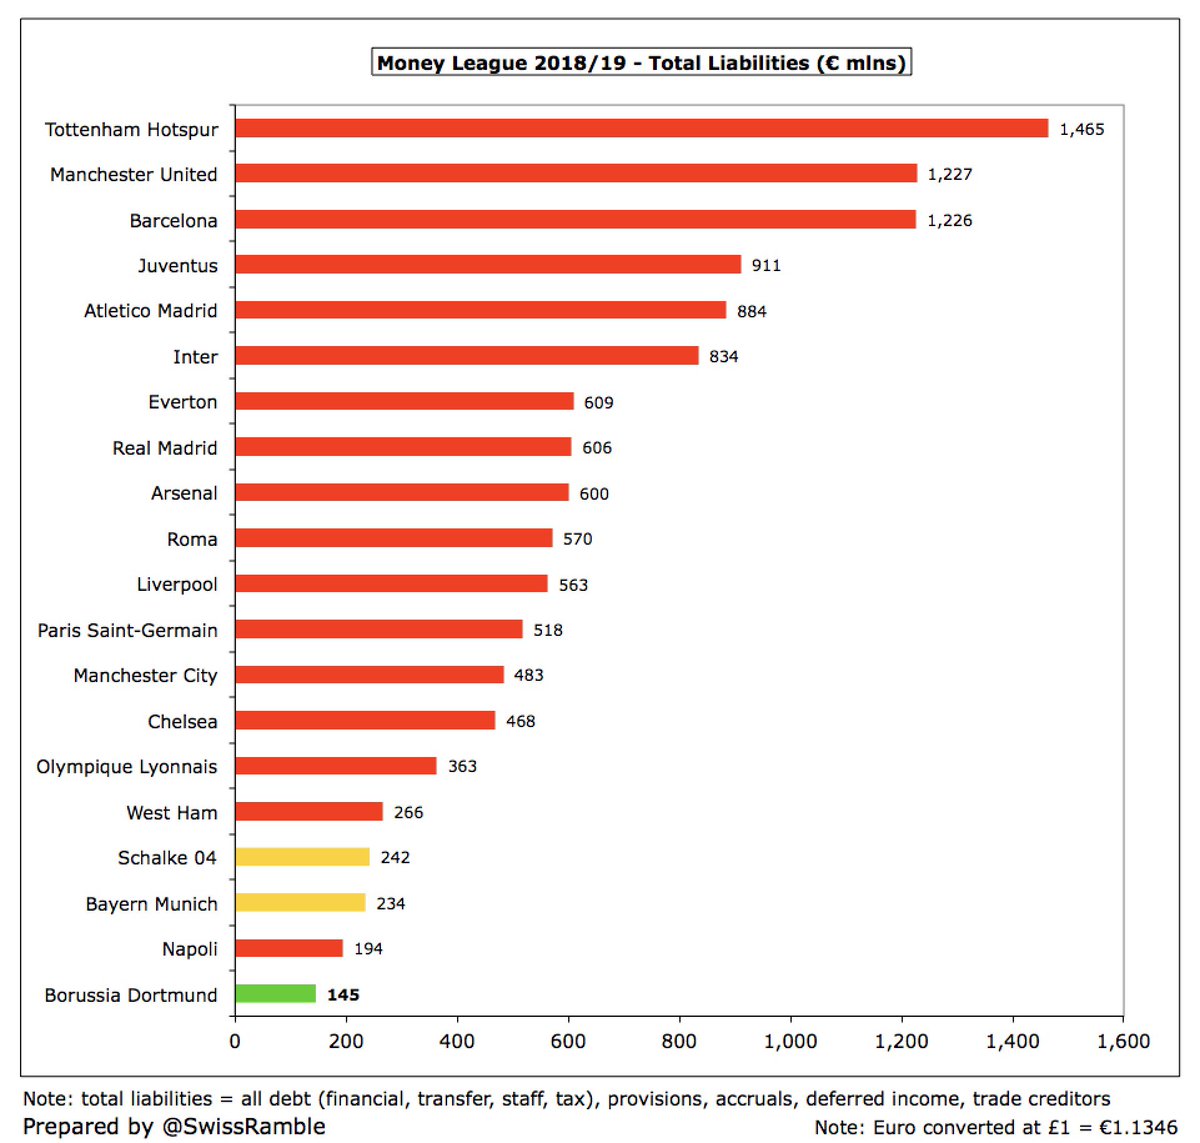 Premier League finances: turnover, wages, debt and performance, News